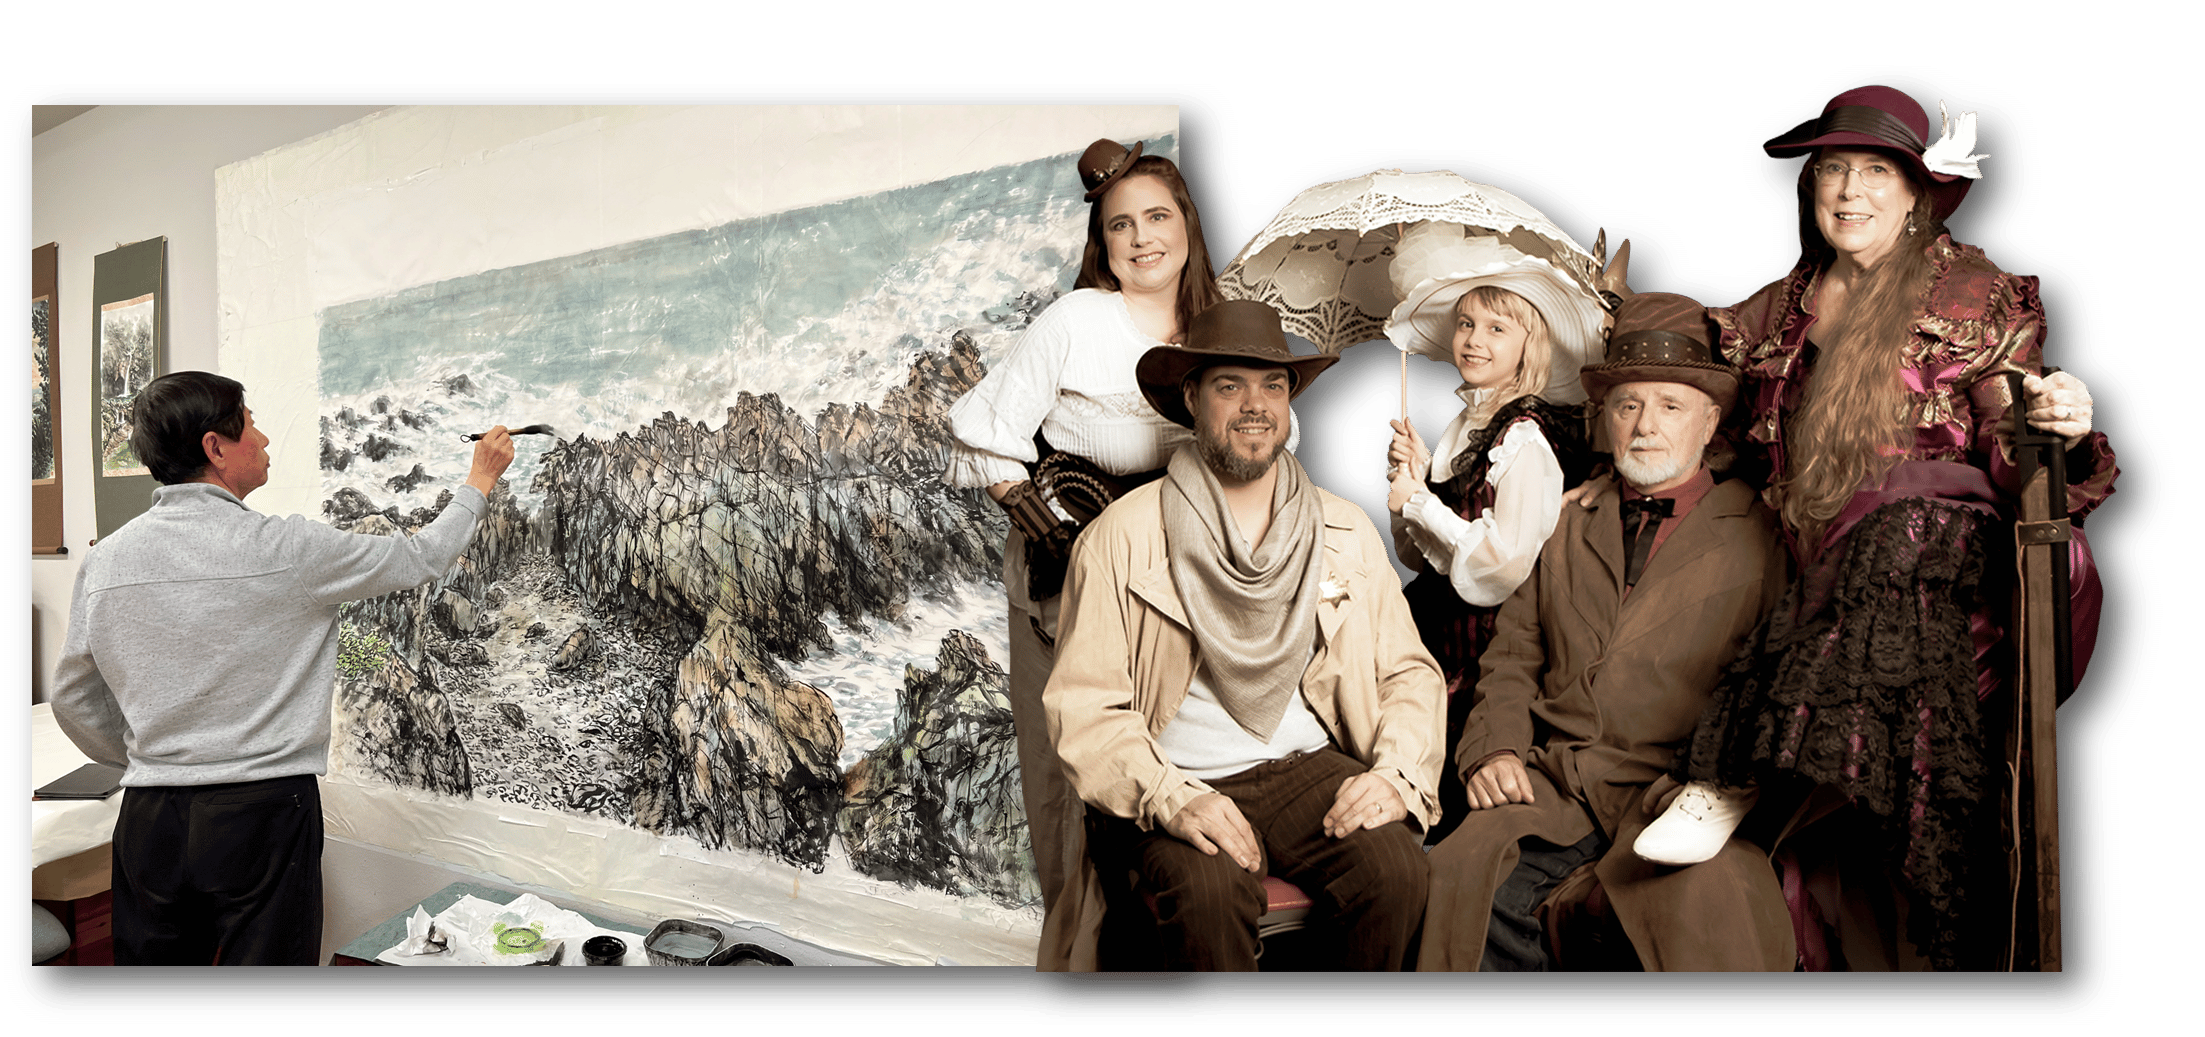 An artist paints a seascape and a family poses in historical garb